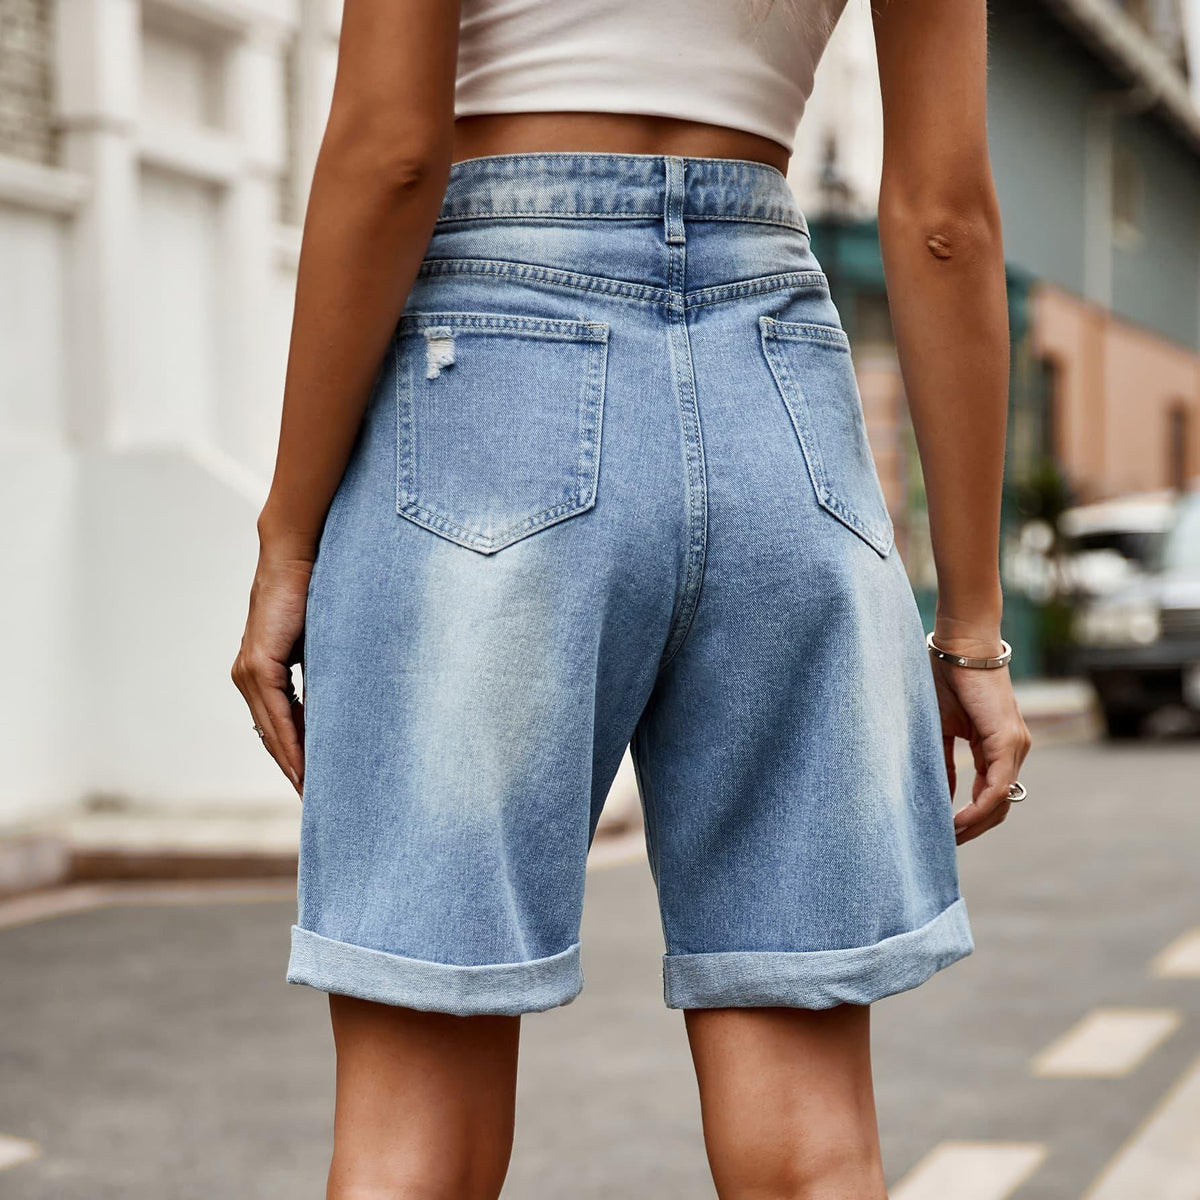 Distressed Buttoned Denim Shorts with Pockets - Crazy Like a Daisy Boutique #